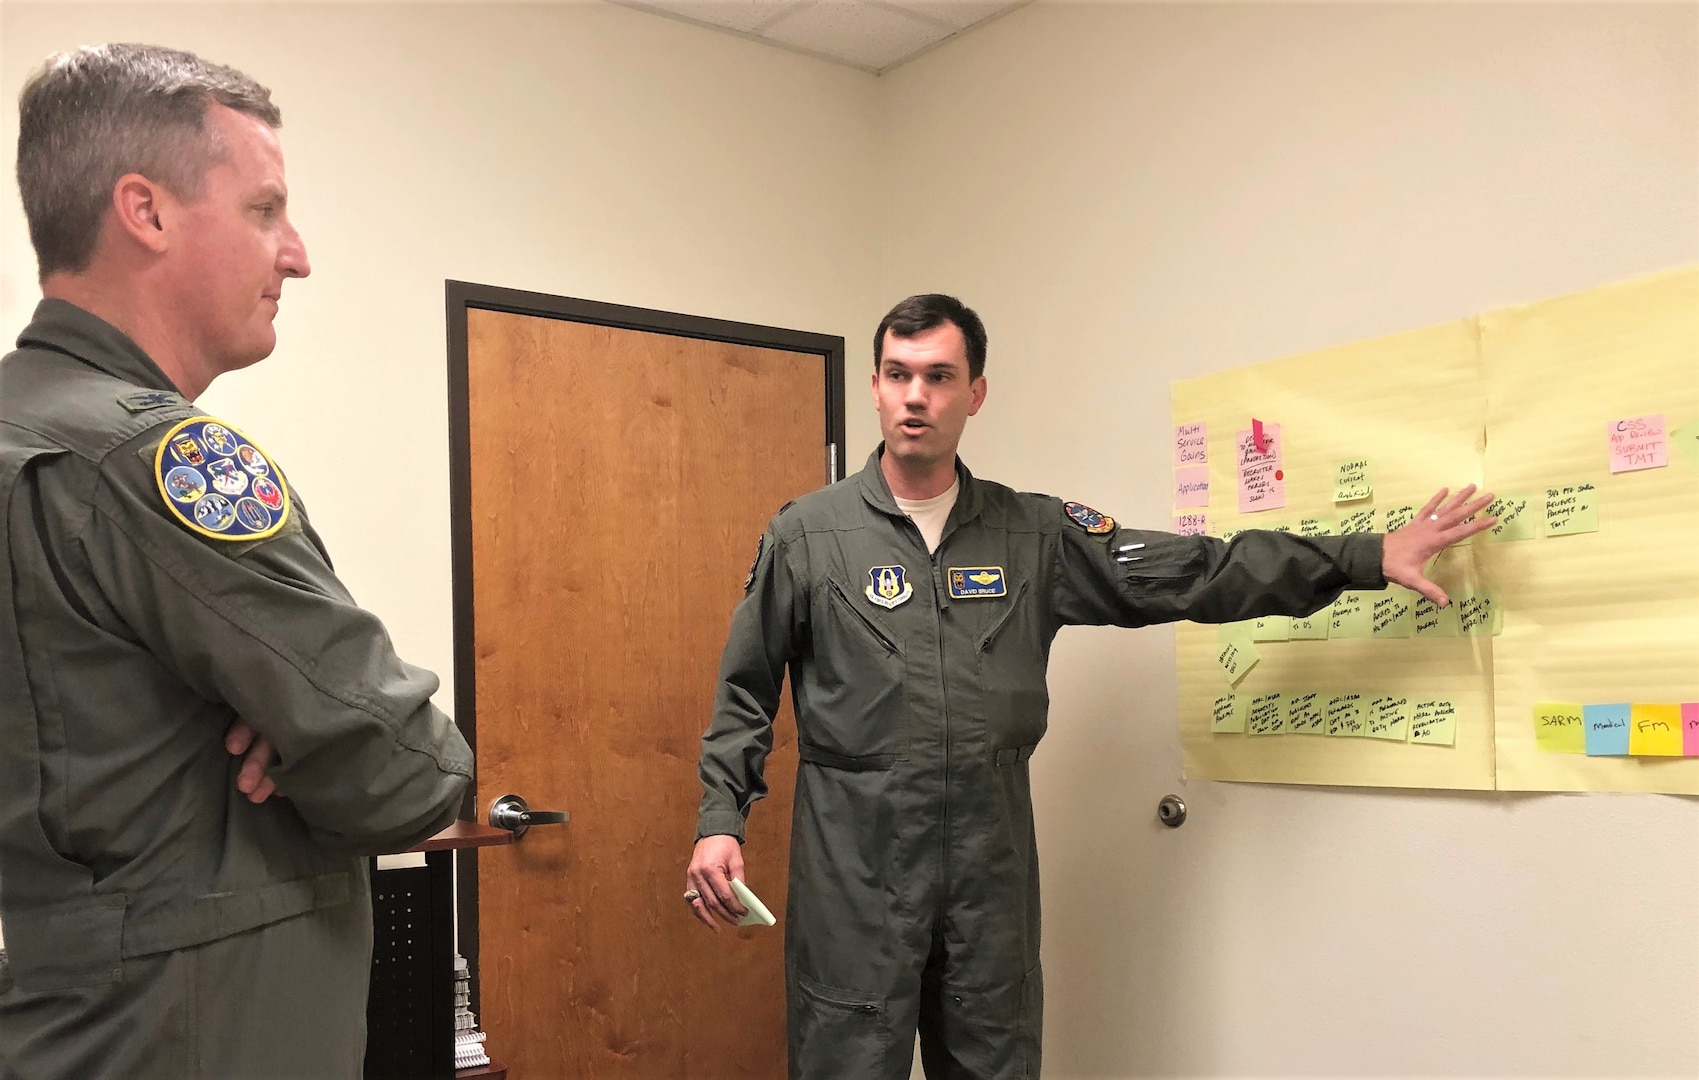 Lt. Col. David Bruce, 97th Flying Training Squadron instructor pilot at Sheppard Air Force Base, Texas, briefs Lt. Col. Brent Drown on road blocks his group identified during the Nov. 19-21 continuous process improvement event at Joint Base San Antonio-Randolph, Texas, held to address pay issues that occur when Reserve members transition between pay statuses. Drown, 340th Flying Training Group deputy commander, stood in for the improvement process champion, 340th FTG Commander Col. Allen Duckworth. (U.S. Air Force photo by Janis El Shabazz)